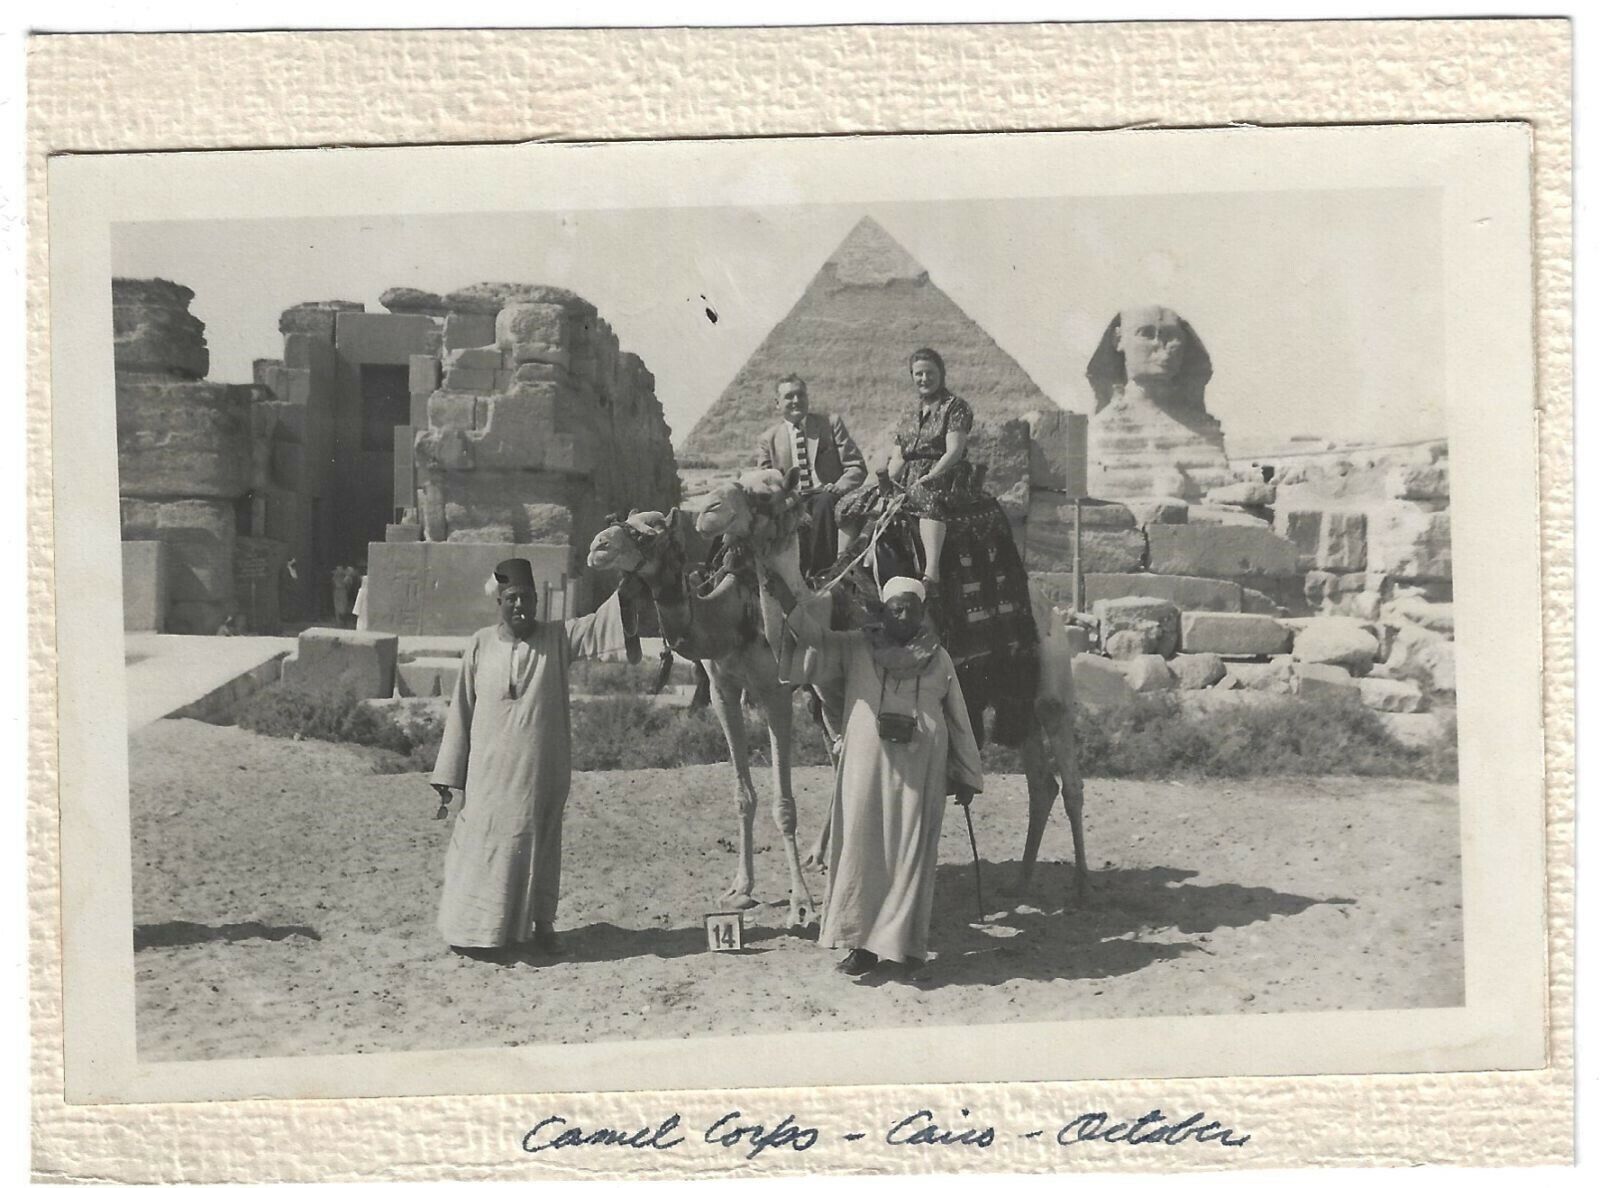 Egypt Sphinx Pyramid Giza Tourists Ride Camel Guide Cairo Vintage Snapshot Photo